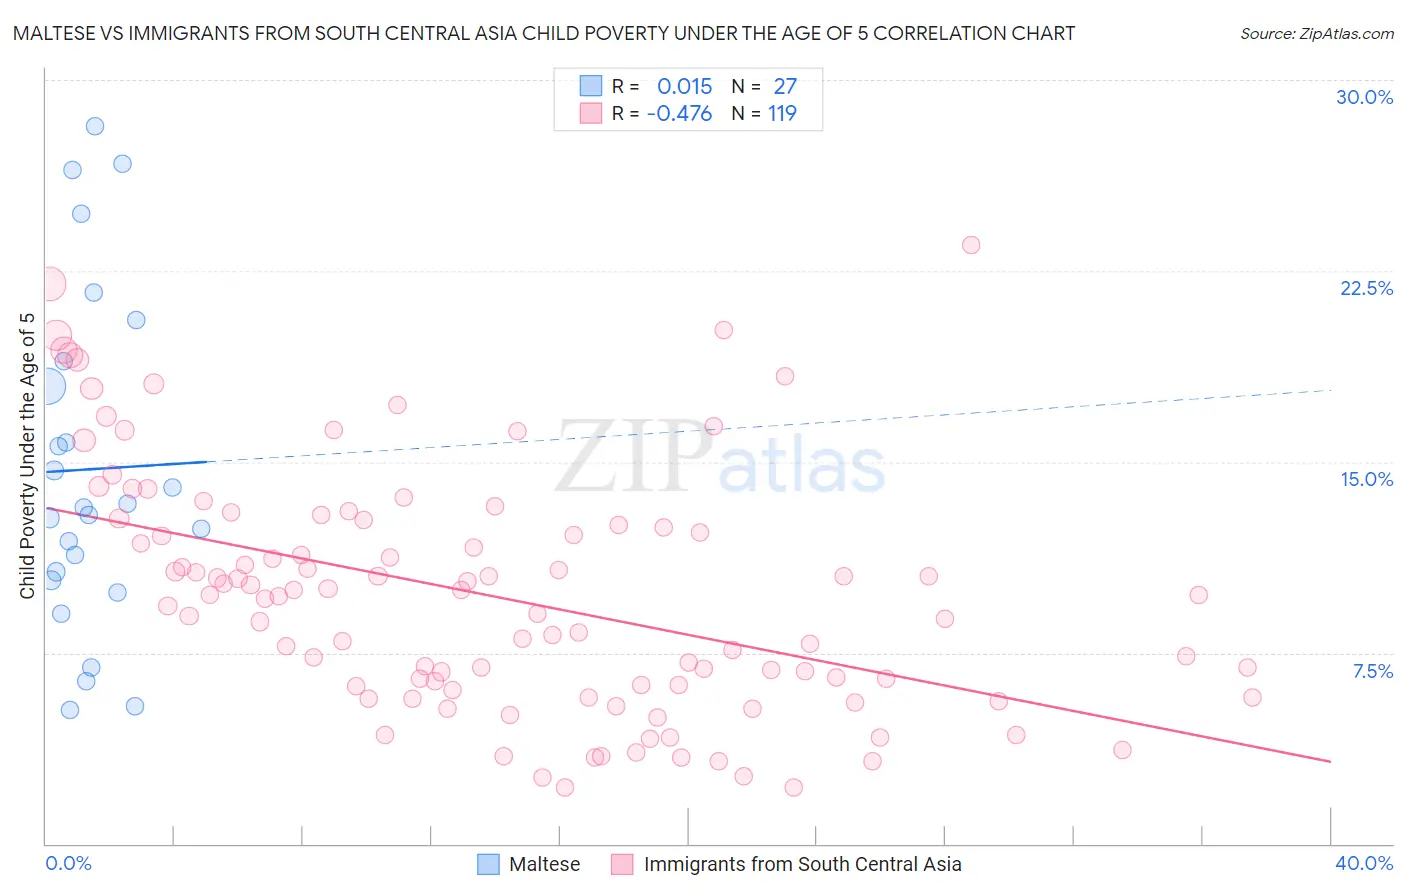 Maltese vs Immigrants from South Central Asia Child Poverty Under the Age of 5